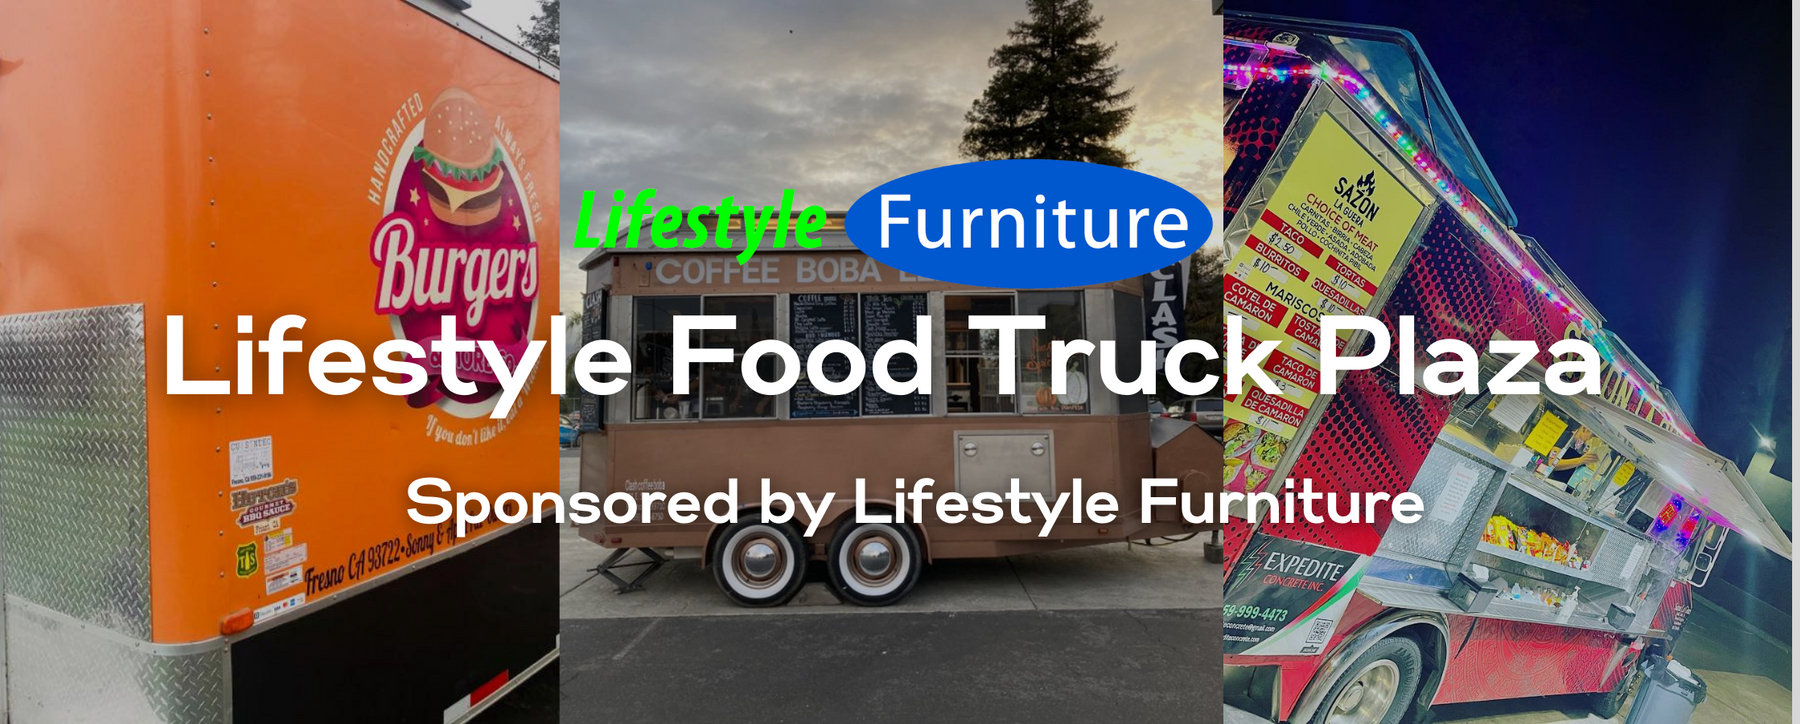 Lifestyle Food Truck Plaza Located at Lifestyle Furniture in Fresno, CA and sponsored by Lifestyle Furniture. 